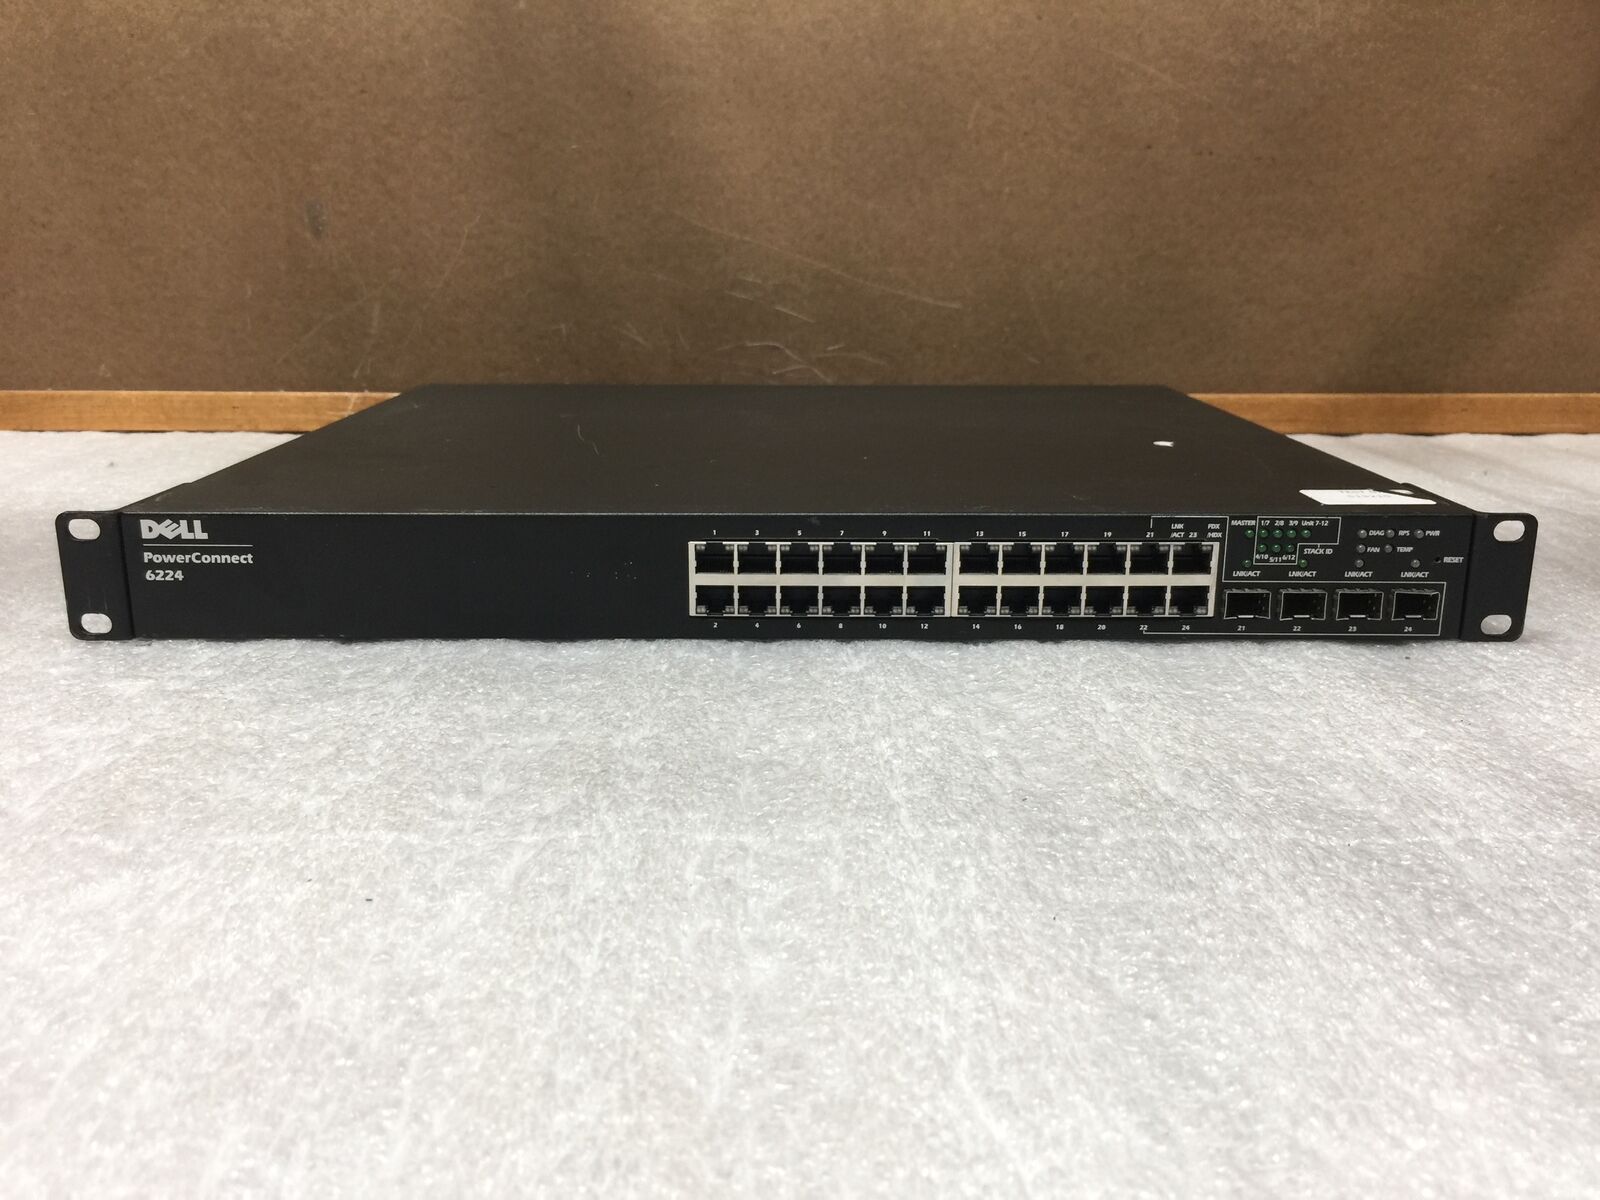 Dell PowerConnect 6224 24 Port Gigabit Switch w/ Stacking Module & Rack Ears